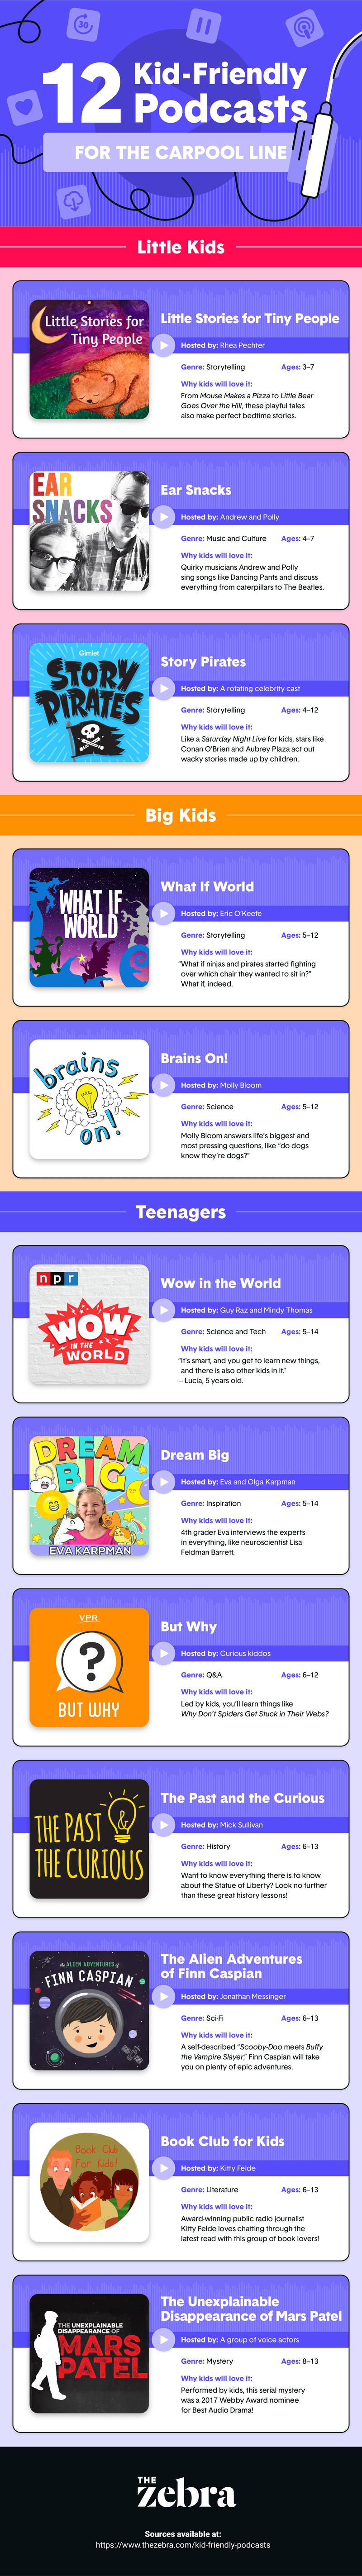 best kid-friendly podcasts infographic